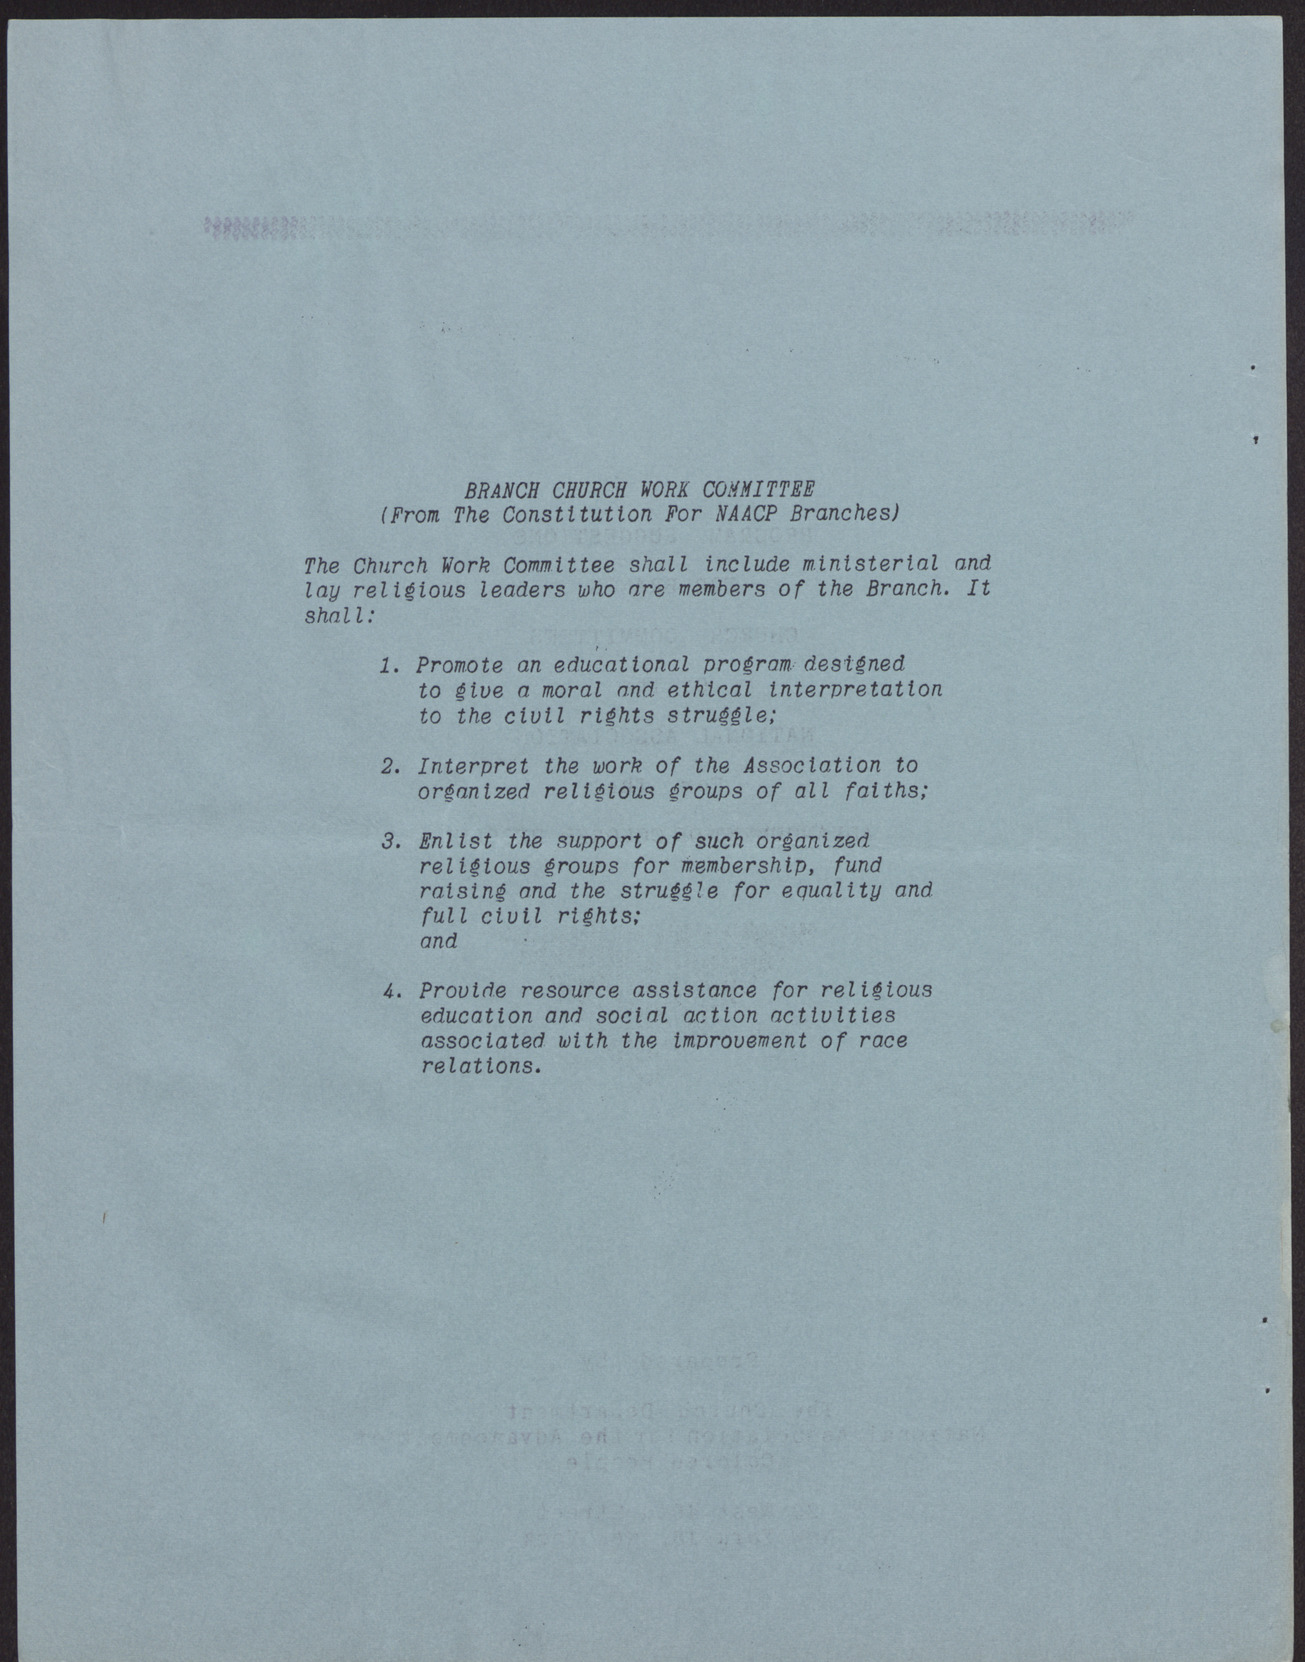 Program Suggestions for Branch Church Committees of the National Association for the Advancement of Colored People (9 pages), no date, page 2